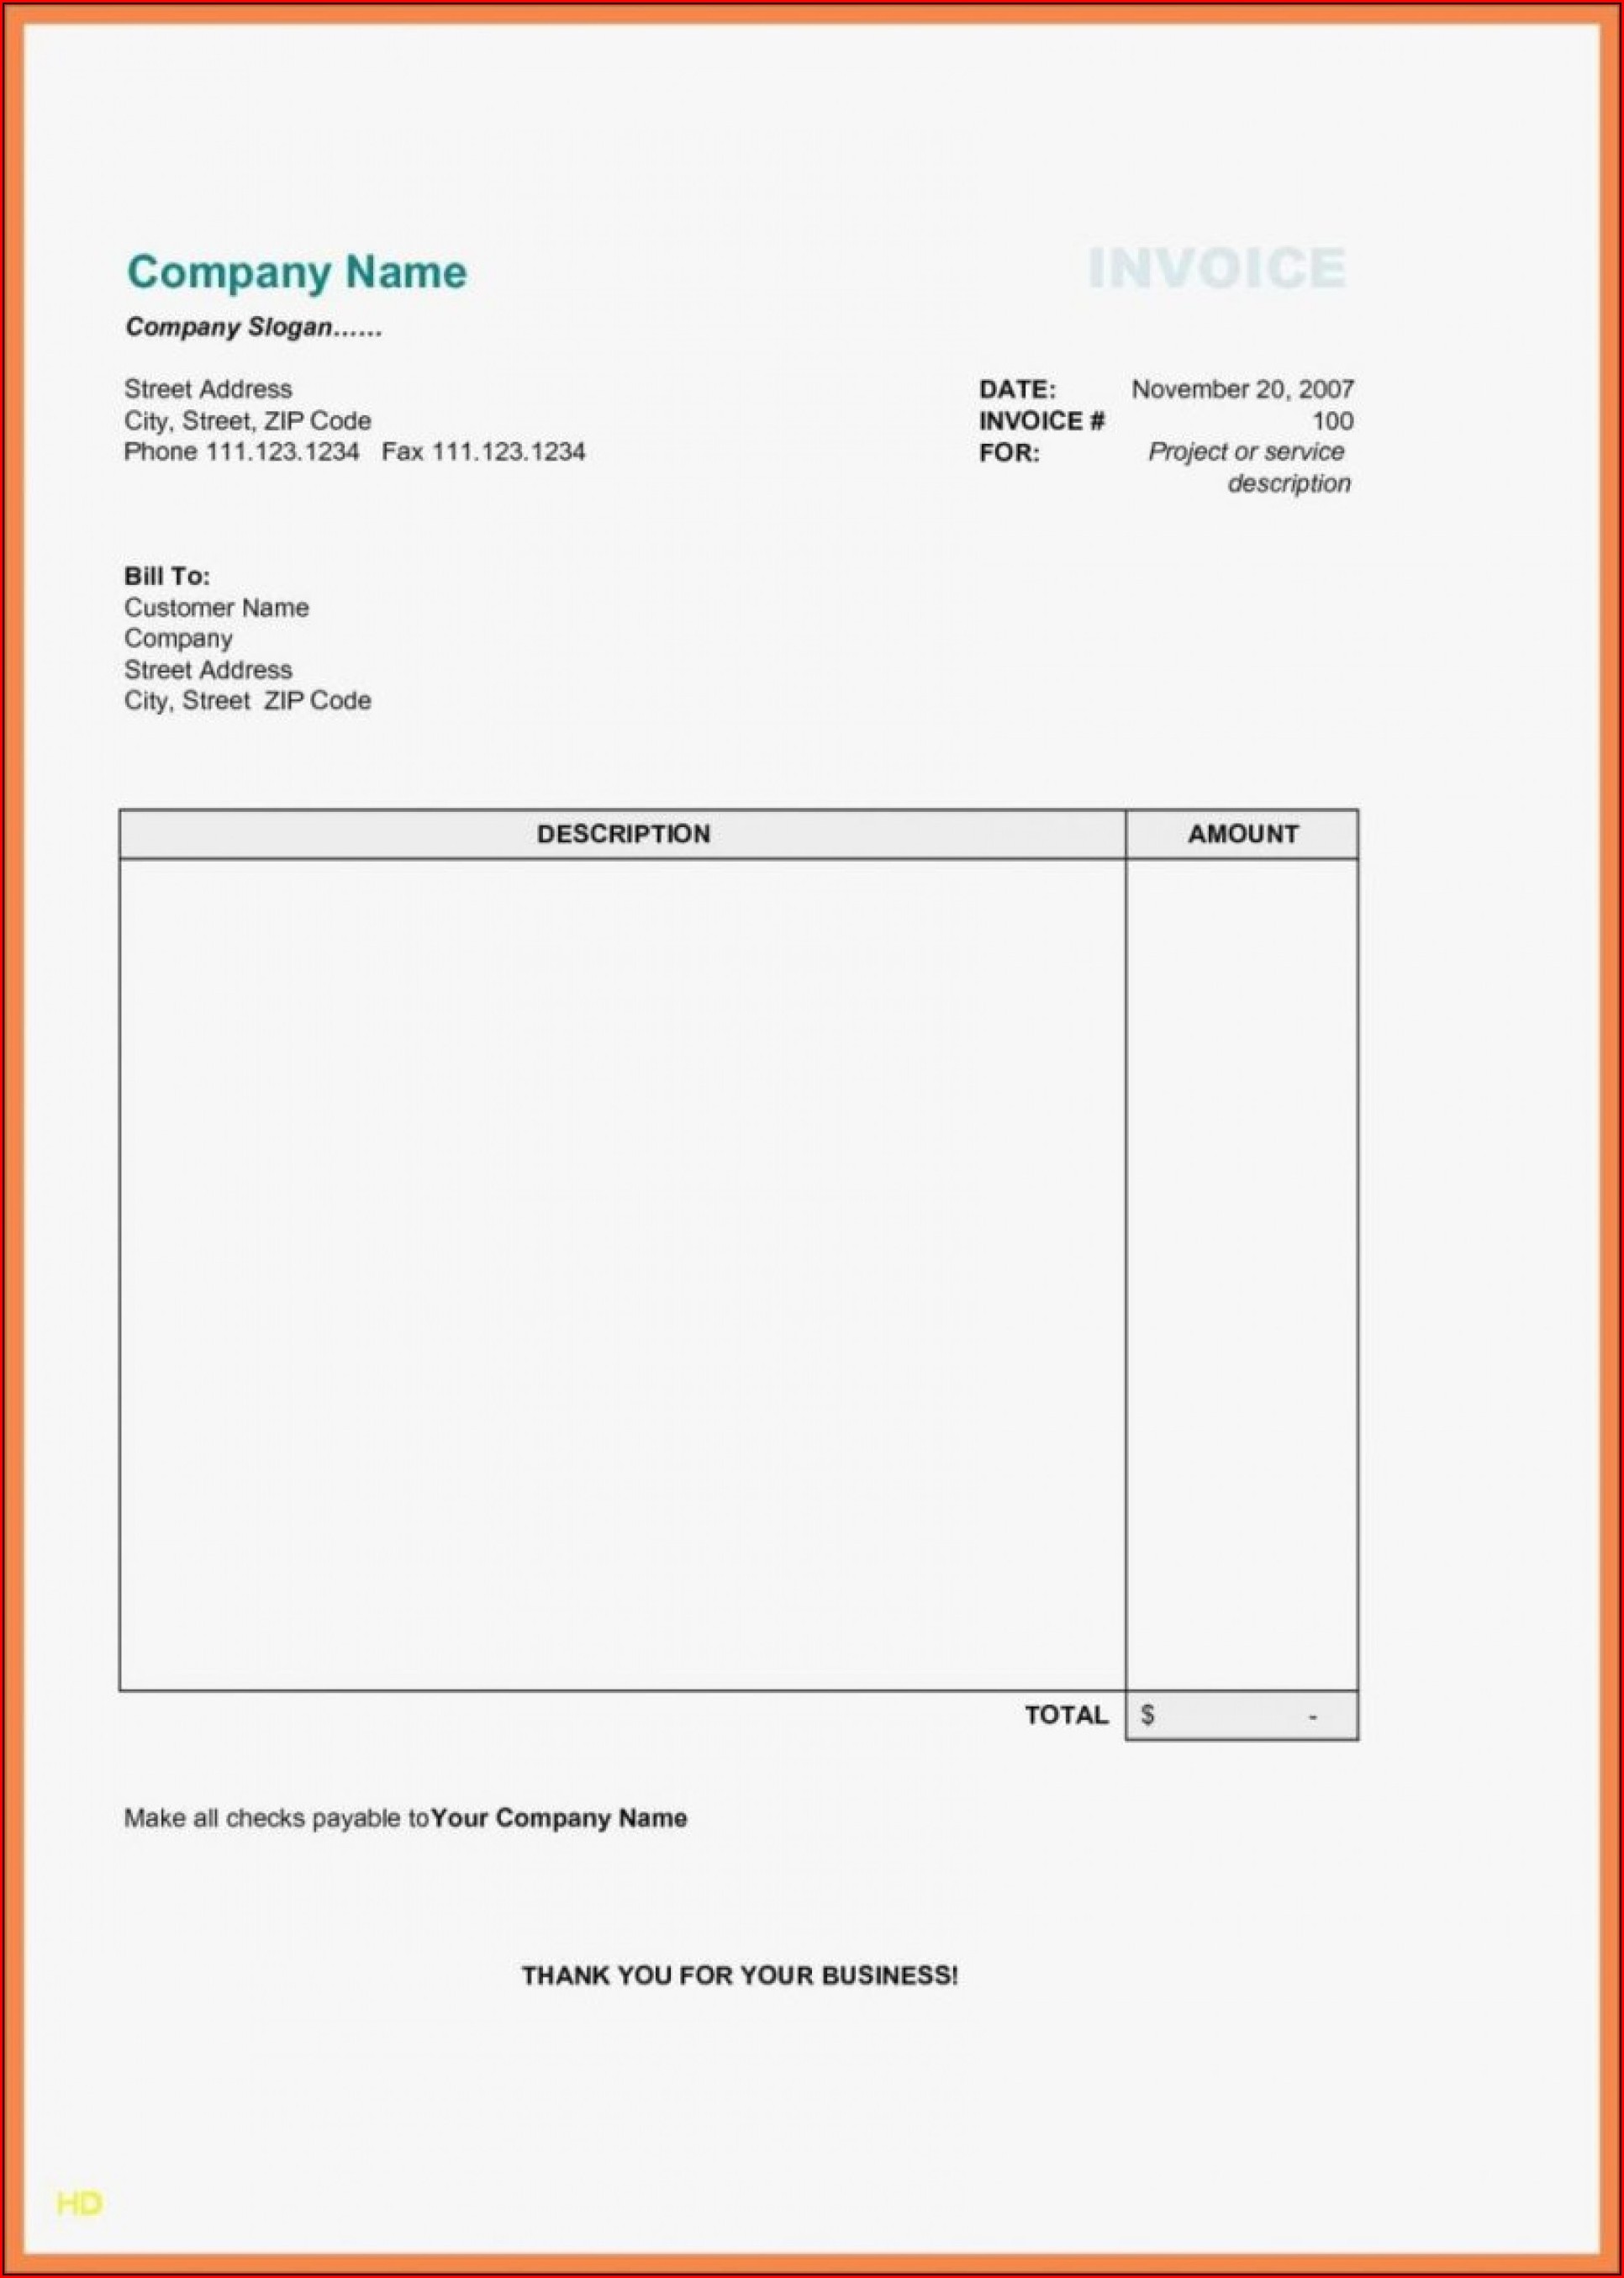 blank-invoice-template-wordpad-template-1-resume-examples-n49m3o6vzz